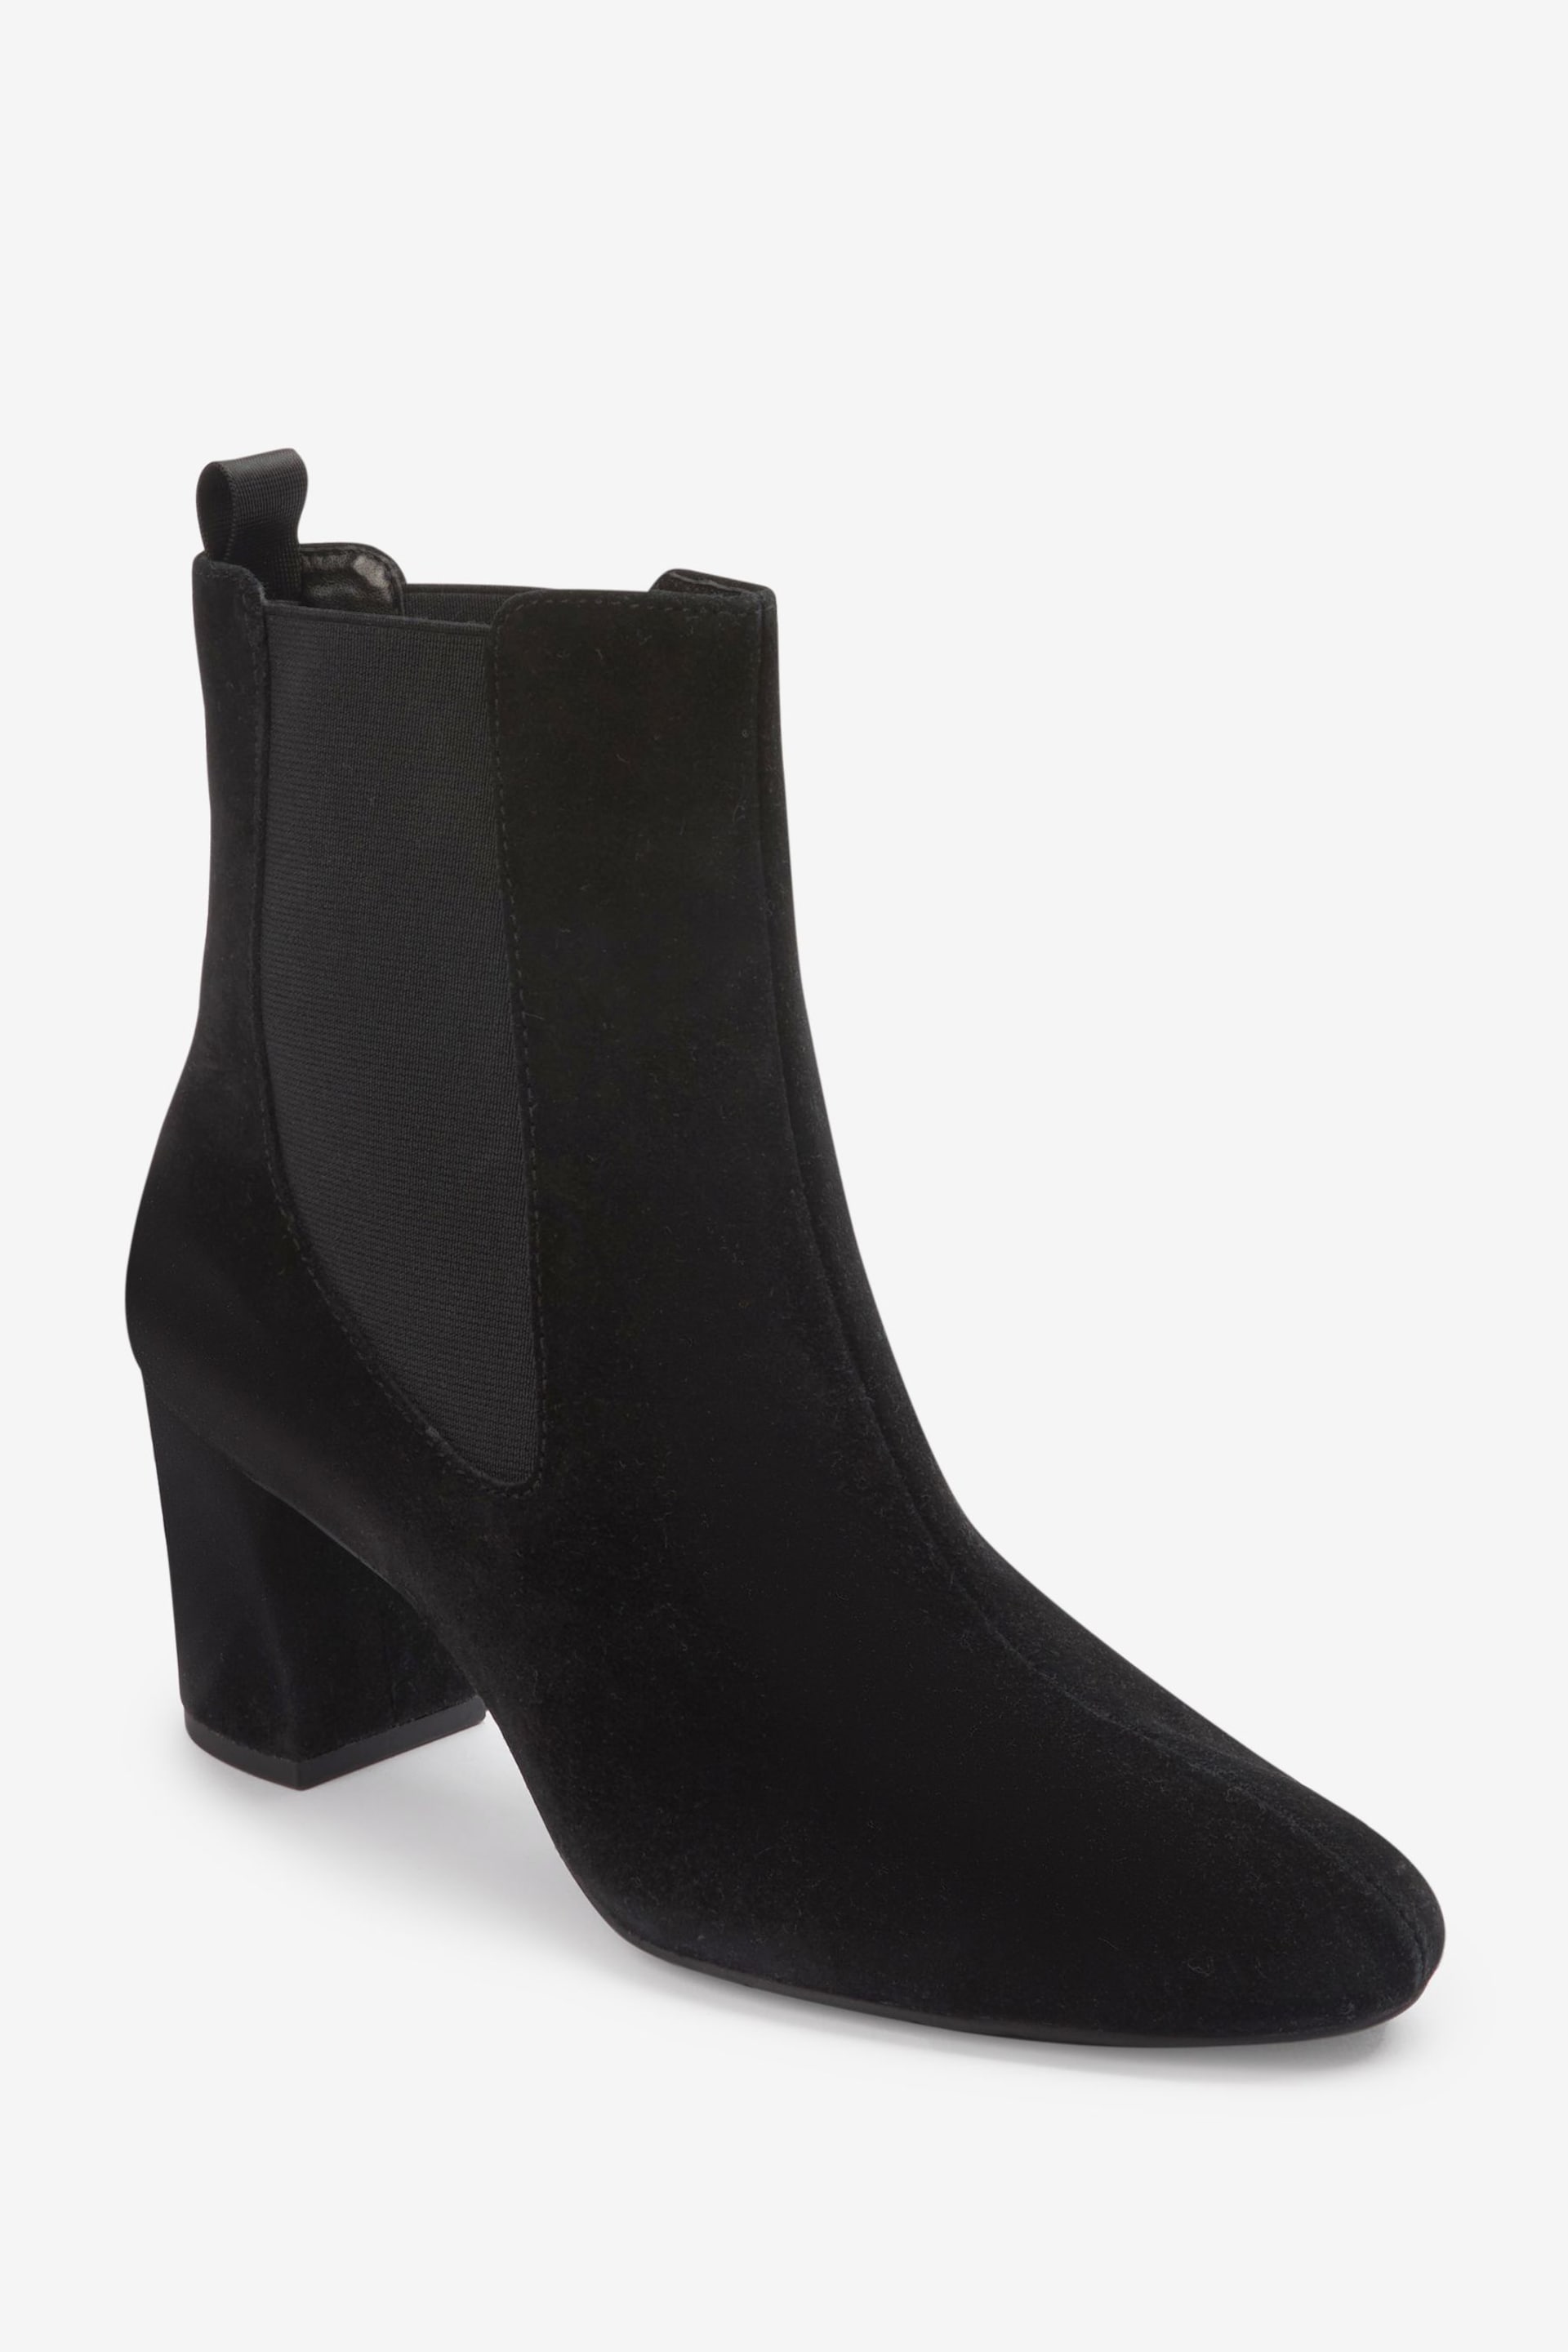 Black Suede Forever Comfort with Motion Flex Heeled Chelsea Boots - Image 7 of 7